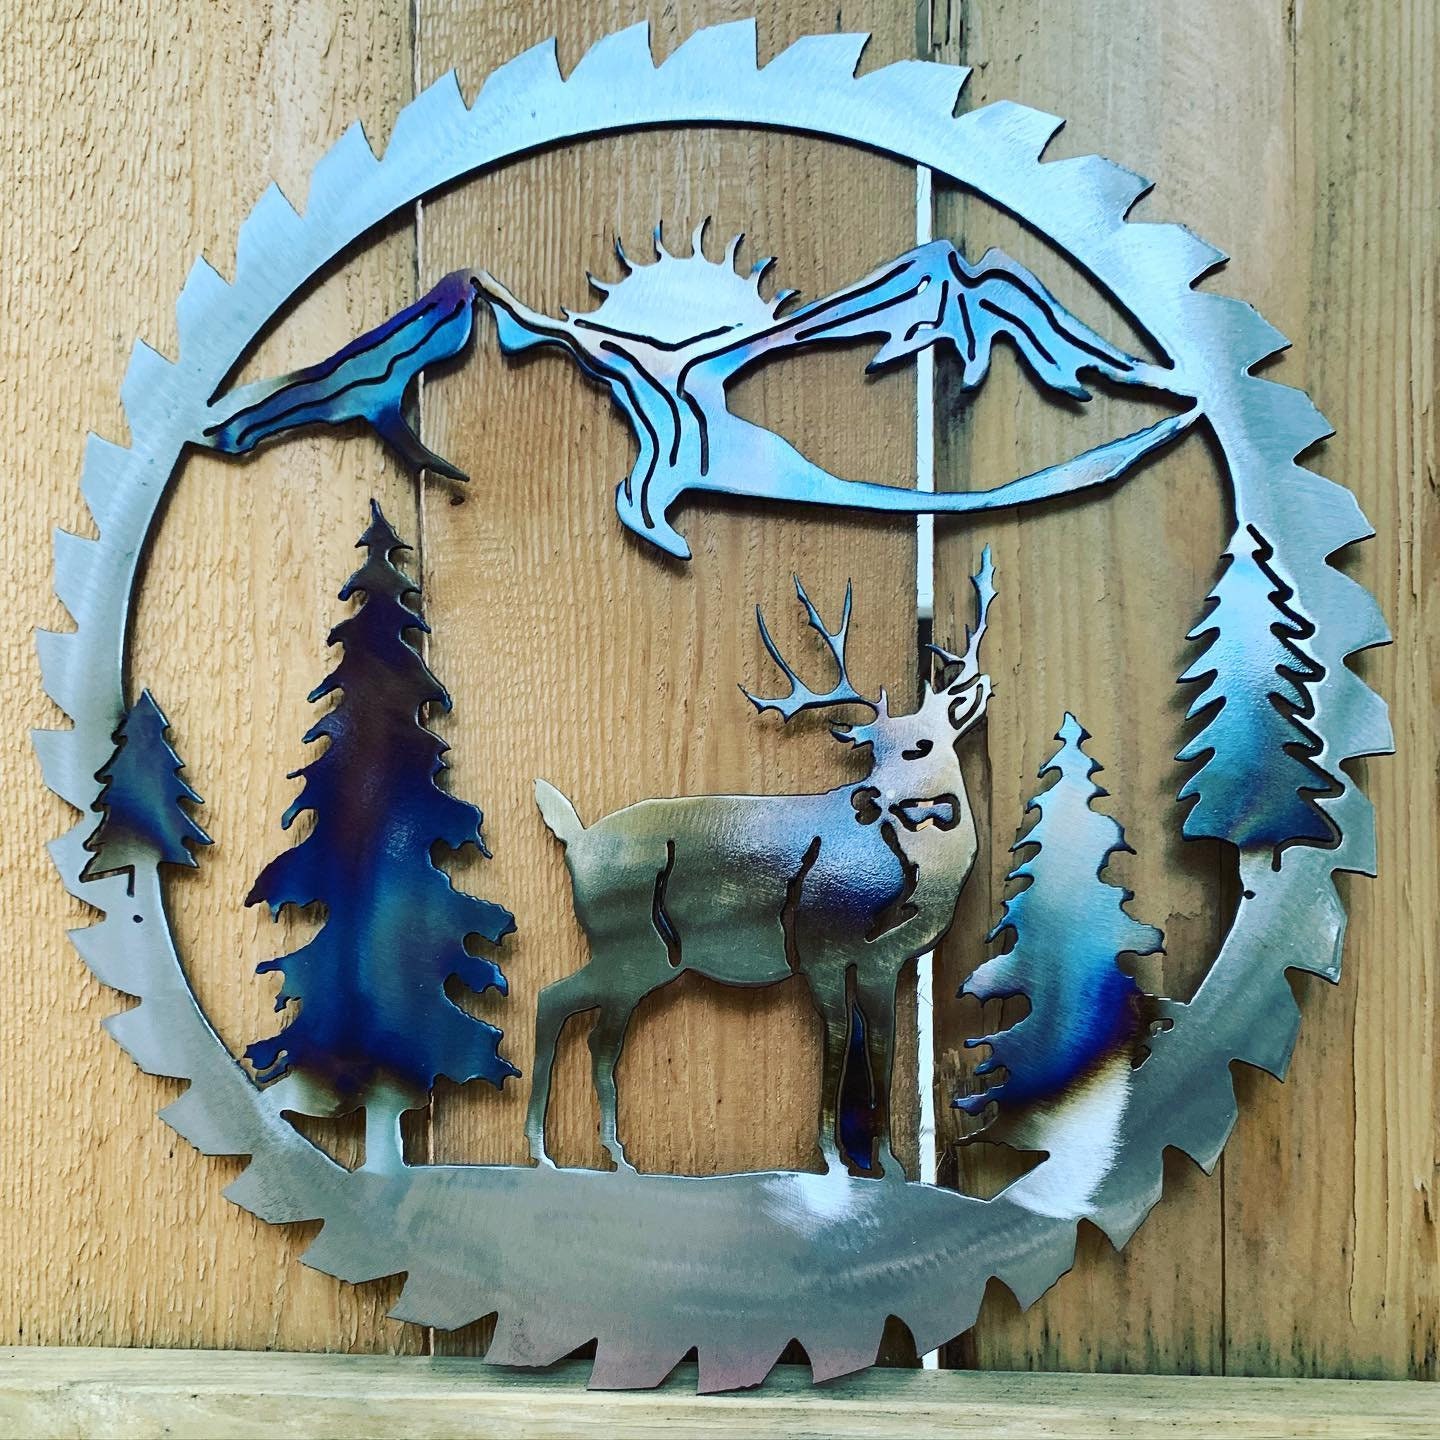 Painted Saw Blade Deer in Forest Scene Hand Painted Metal Saw Blade Signed by the Artist-Deer Hunter Gift-Cabin Decor-Man Cave Art